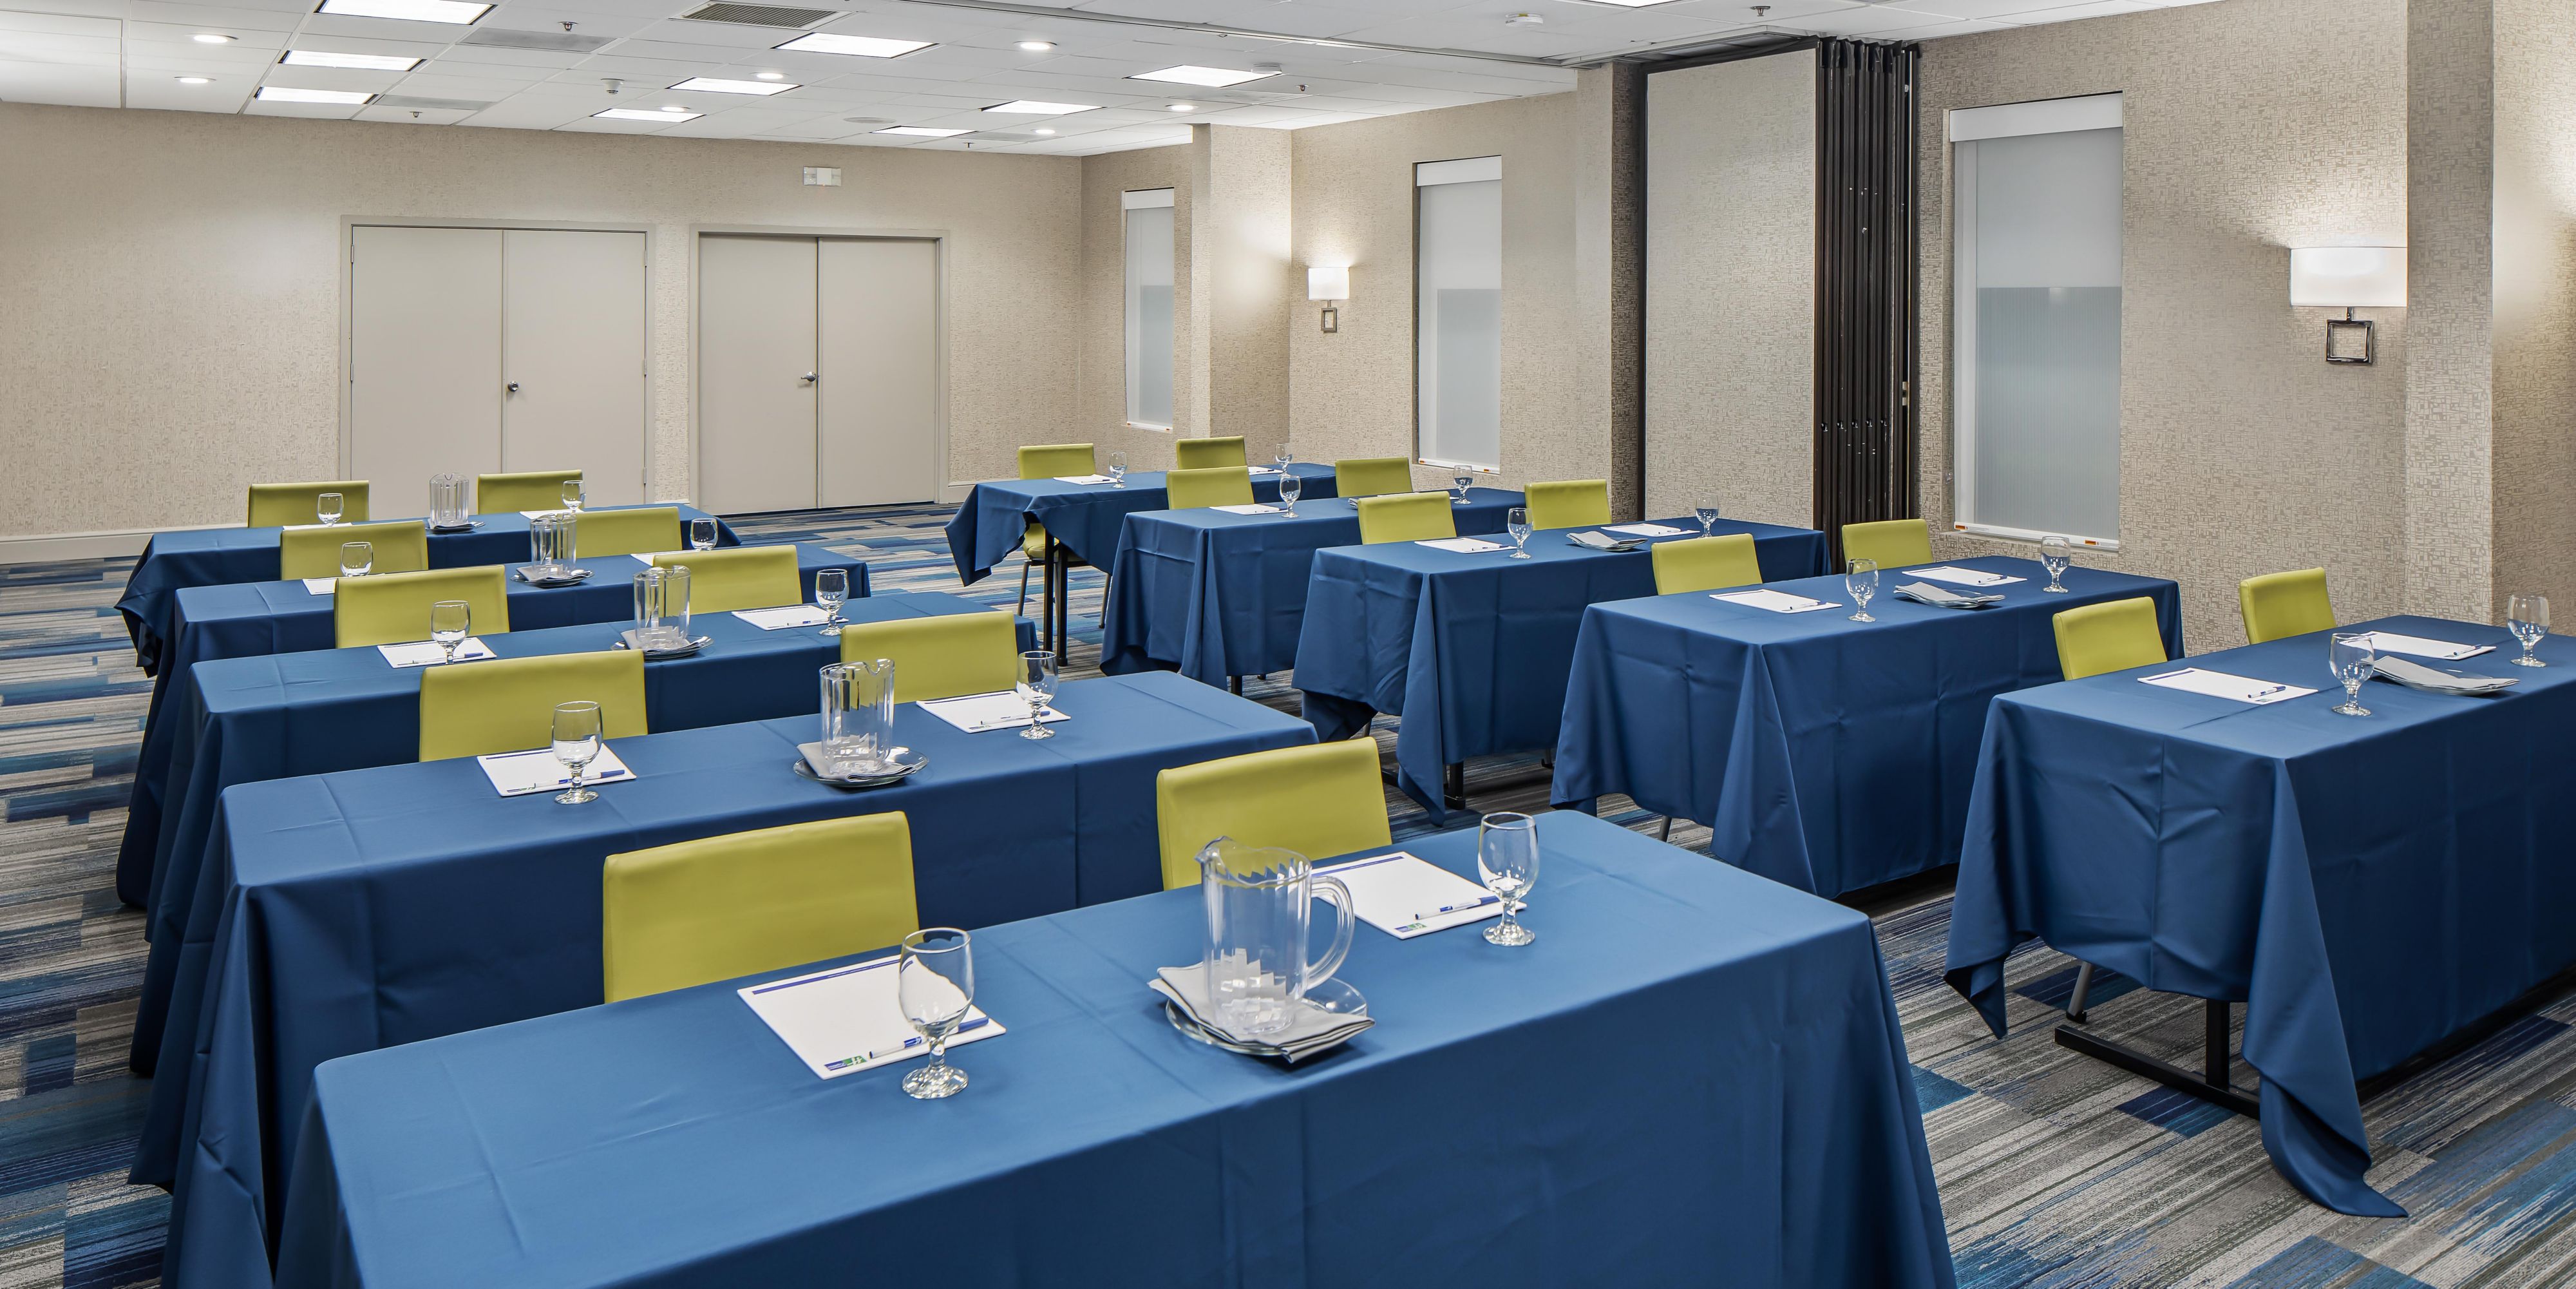 Our Peachtree Ballroom is perfect for your next meeting, training, or social event. Our commitment to the IHG Way of Clean, and the process of ongoing cleaning, sanitization, and social distancing allows you and your attendees to feel safe.  Also, IHG requires masks in all public spaces. Please call (404) 324-4182 to book your next event.